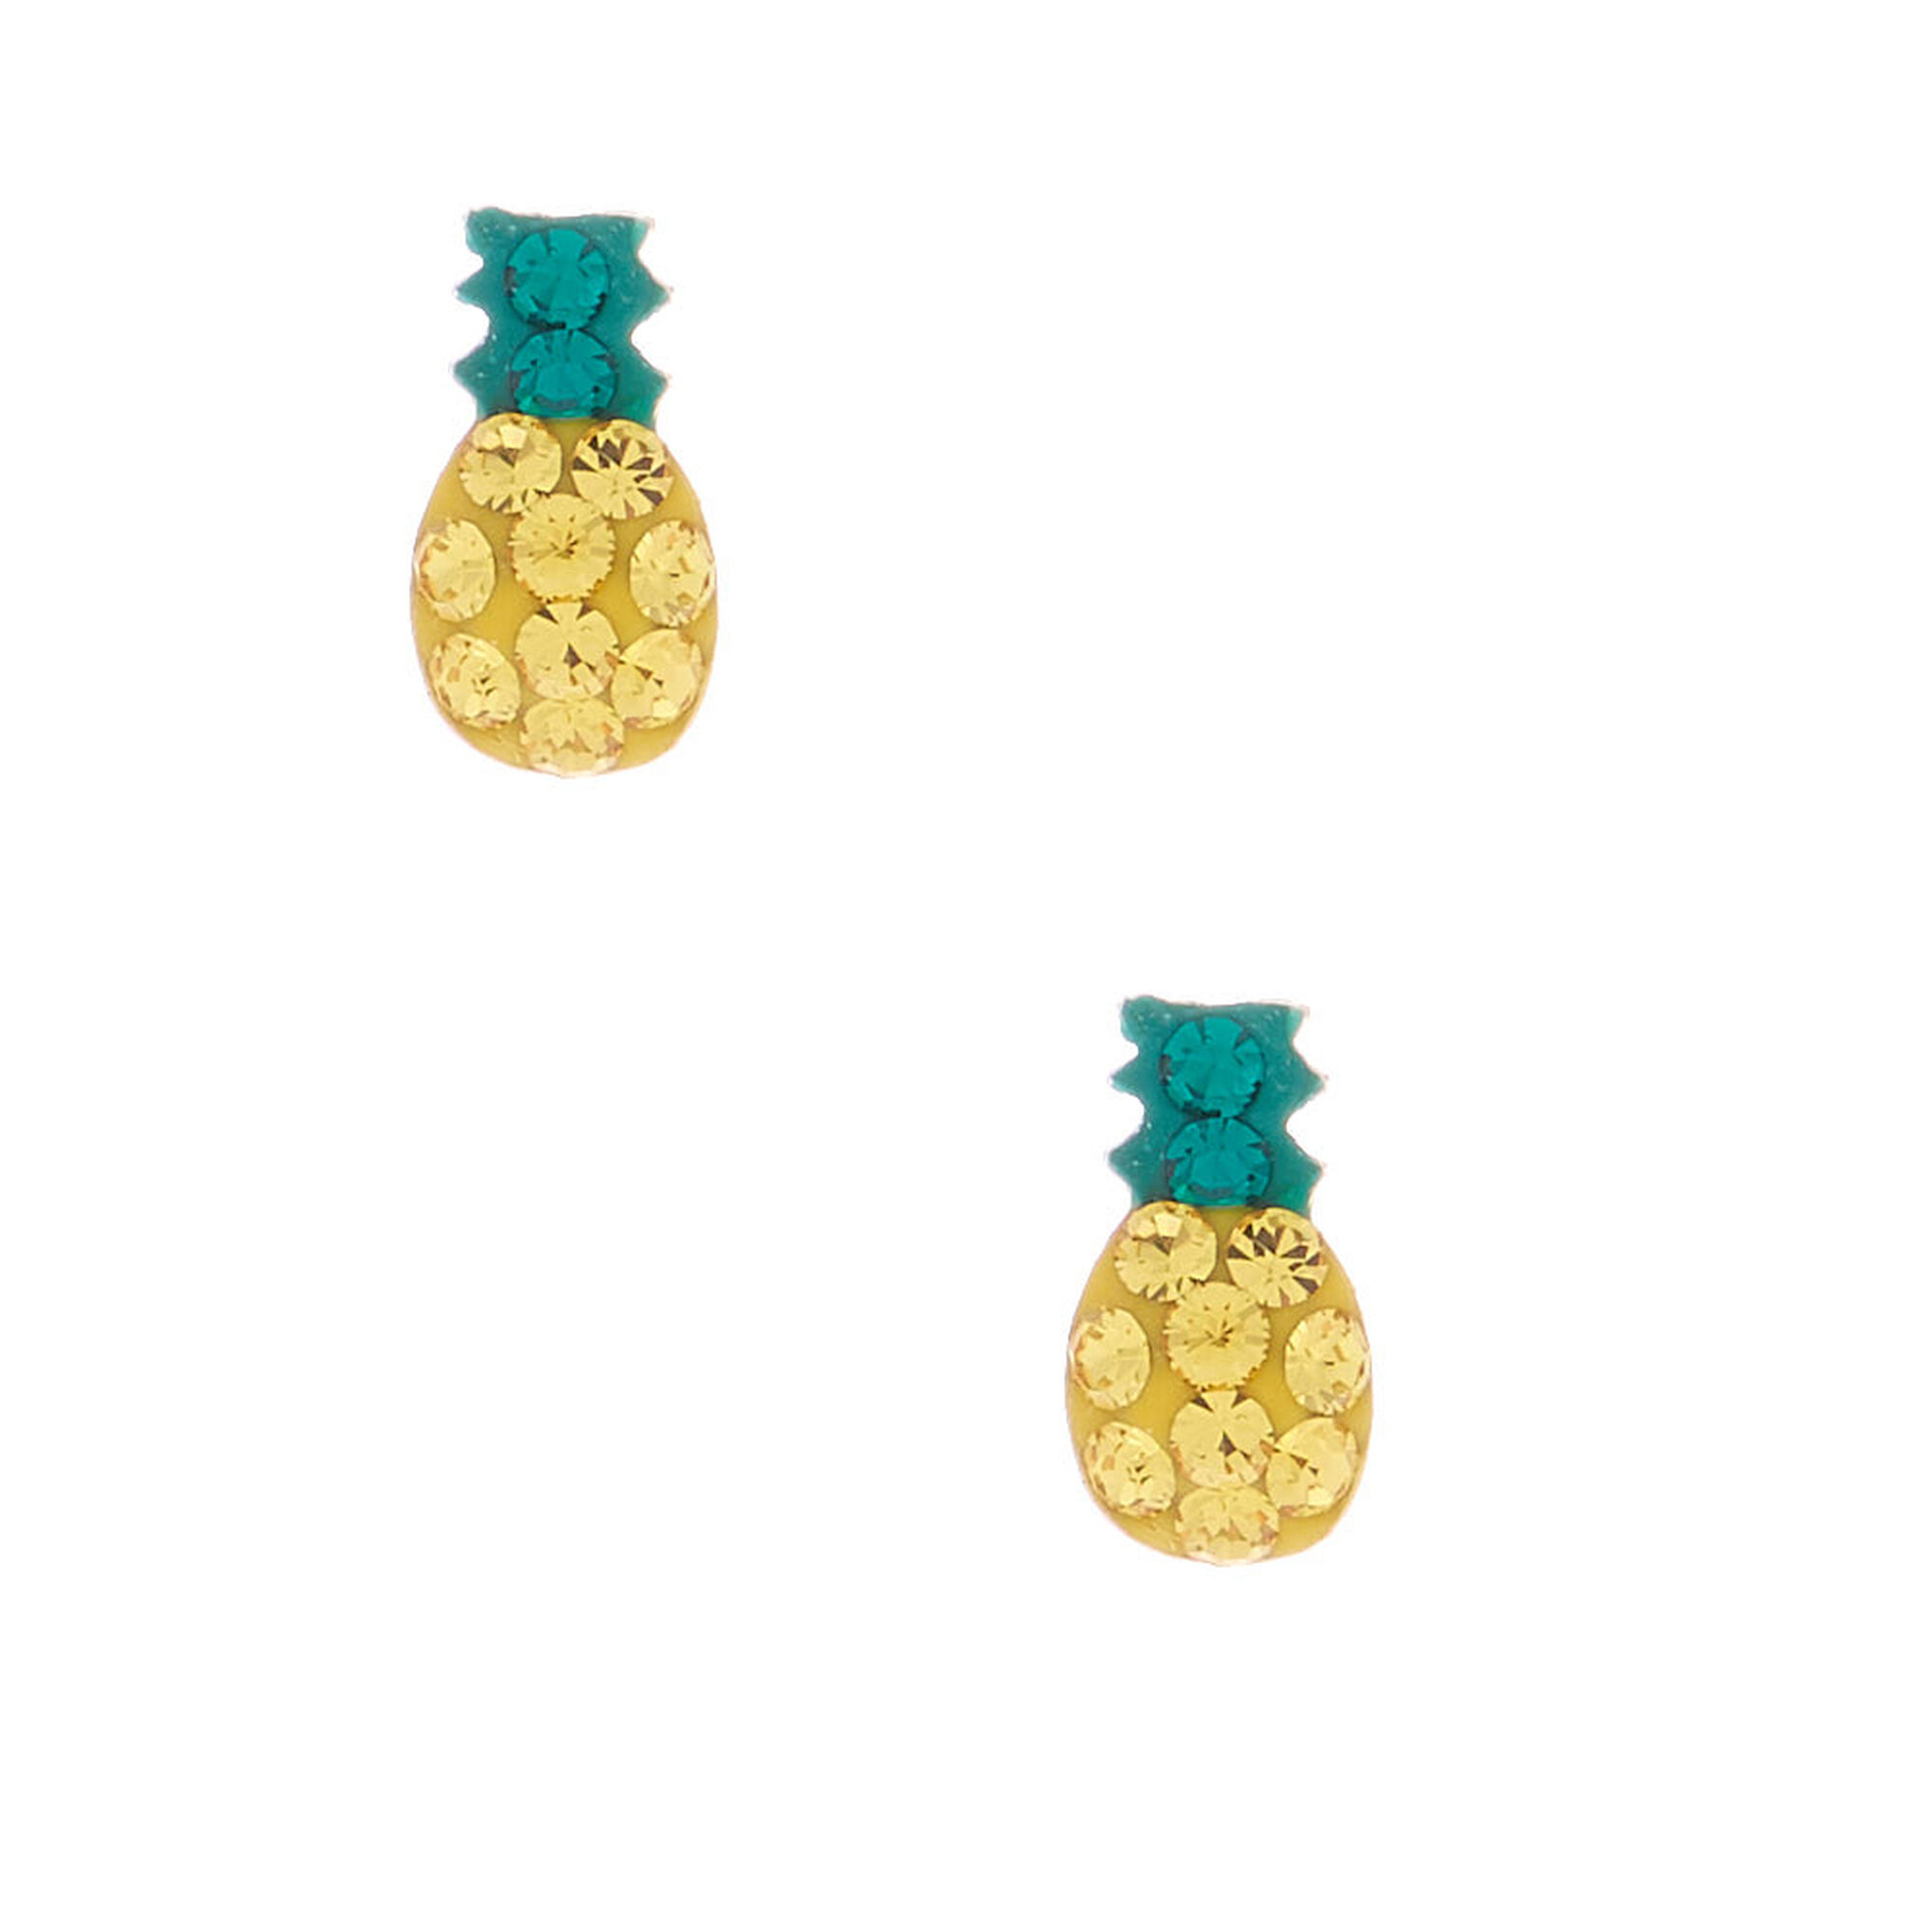 View Claires Pineapple Stud Earrings Silver information